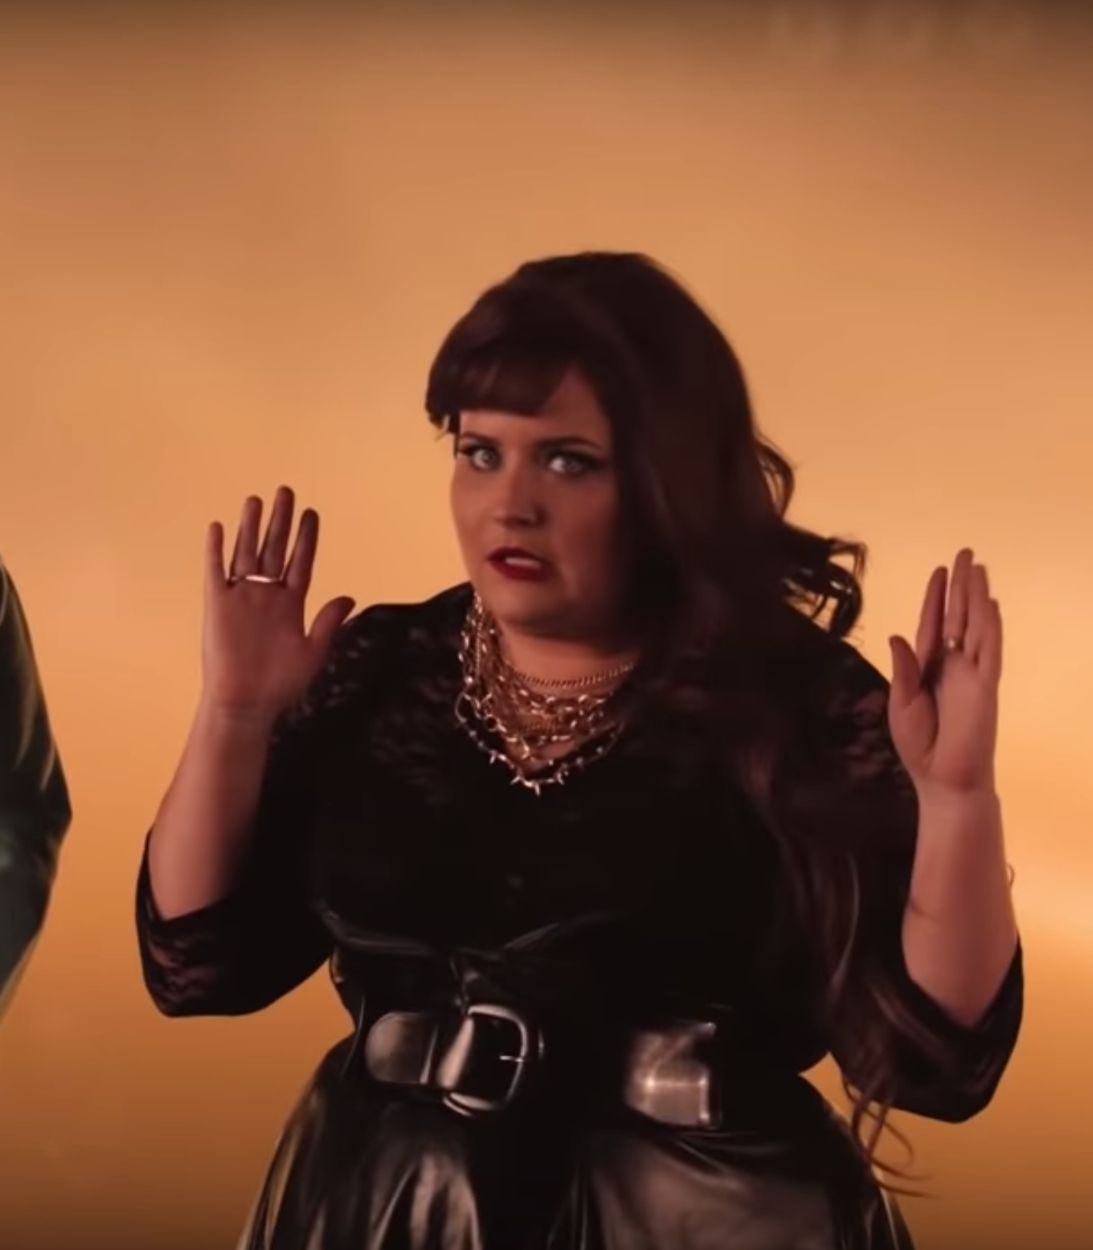 snl twin bed jean aidy bryant TLDR vertical